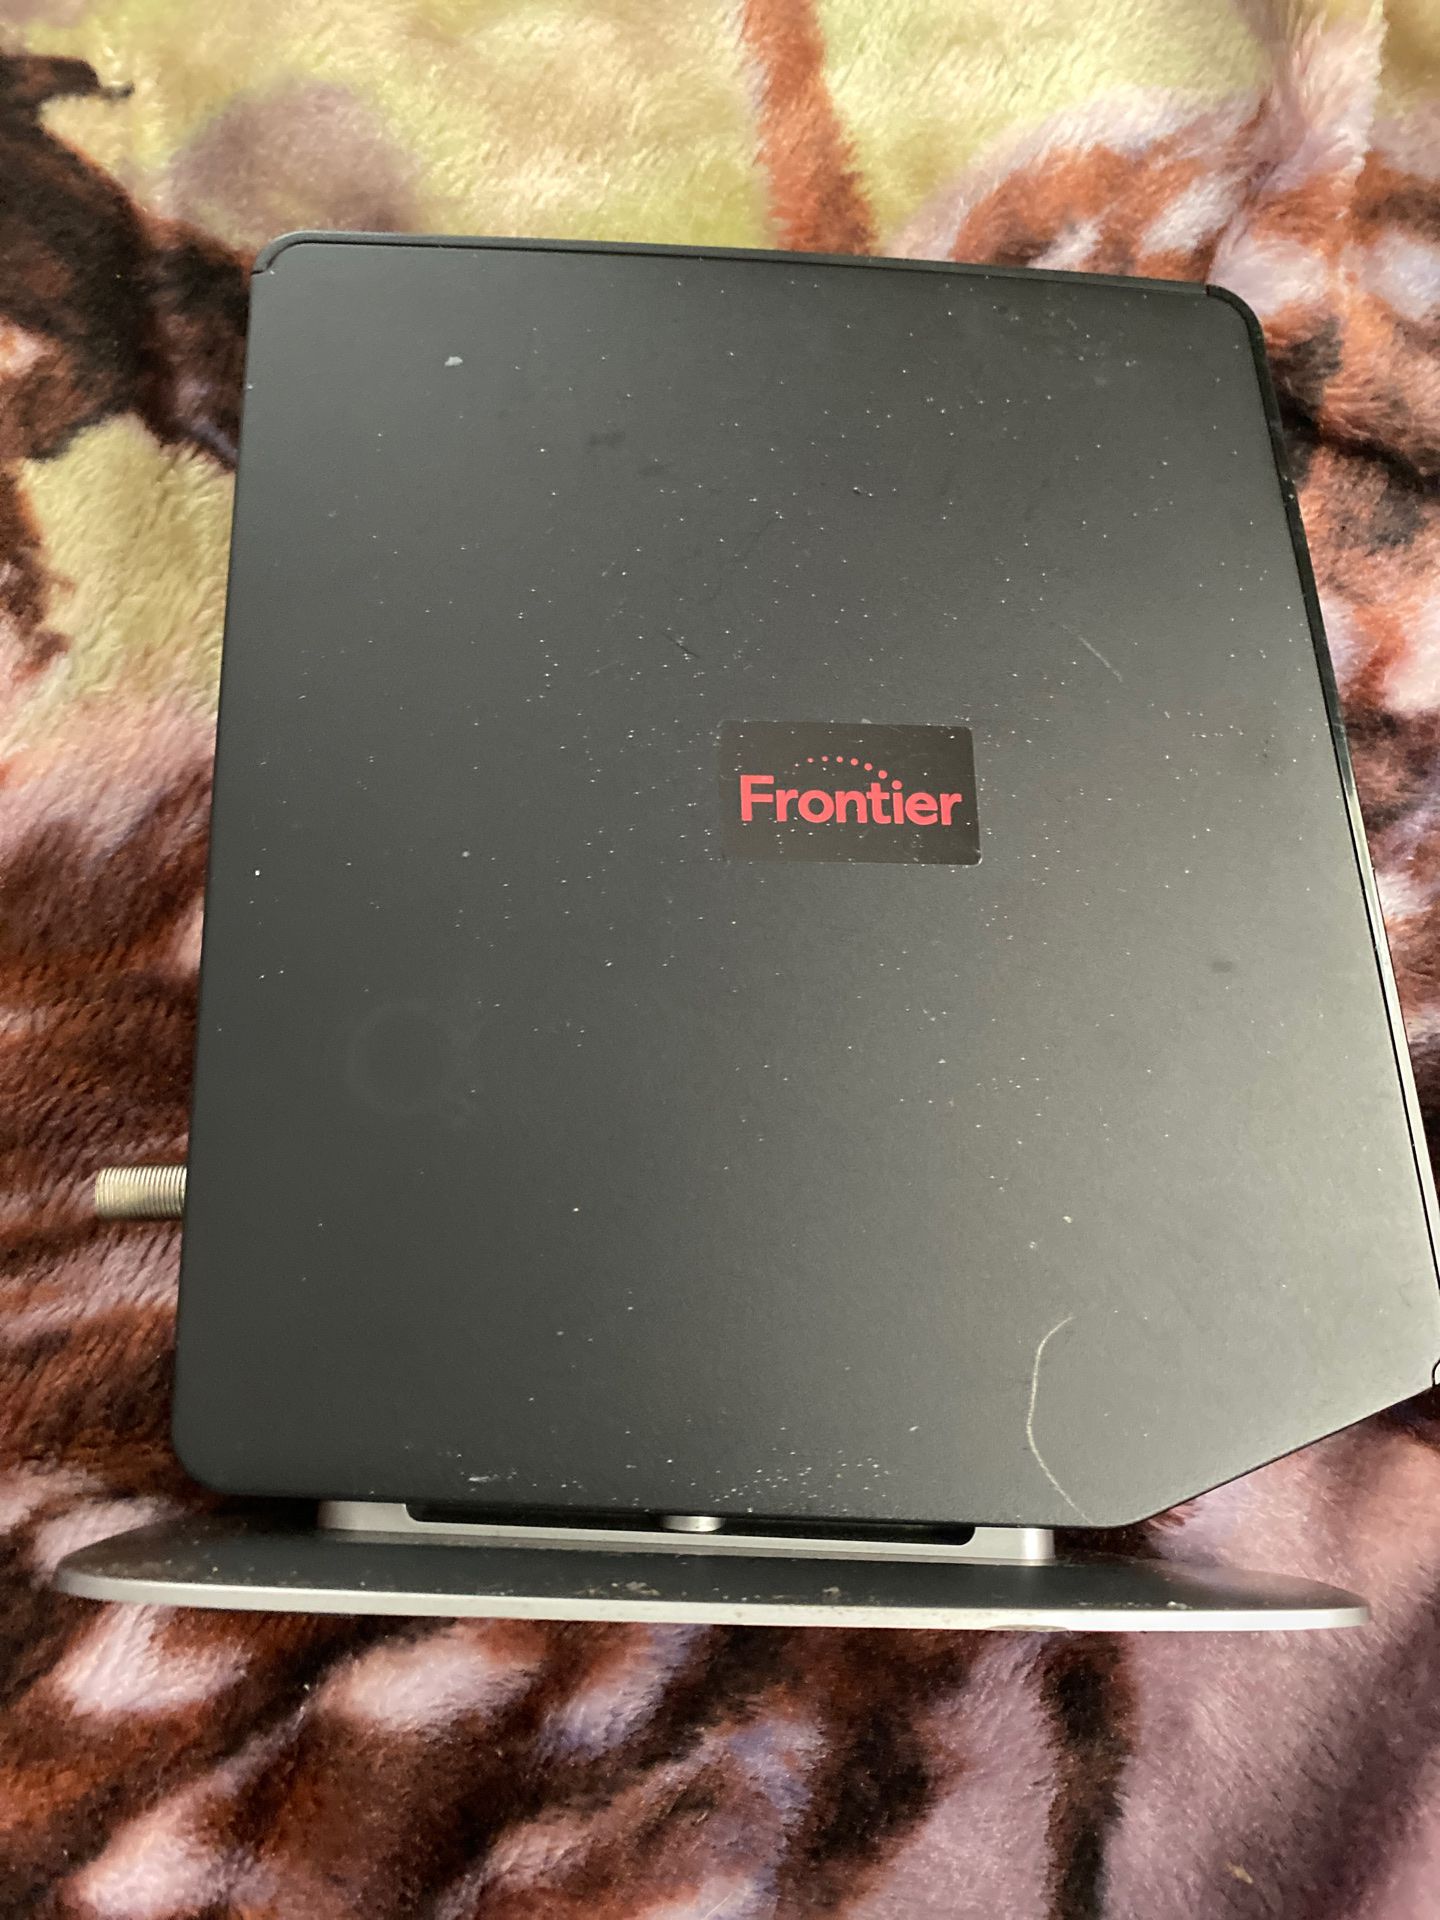 Frontier WiFi router own outright and not pay monthly for your router. Paid over 250.00 only thing missing is dc cord 12 v very easy to get.